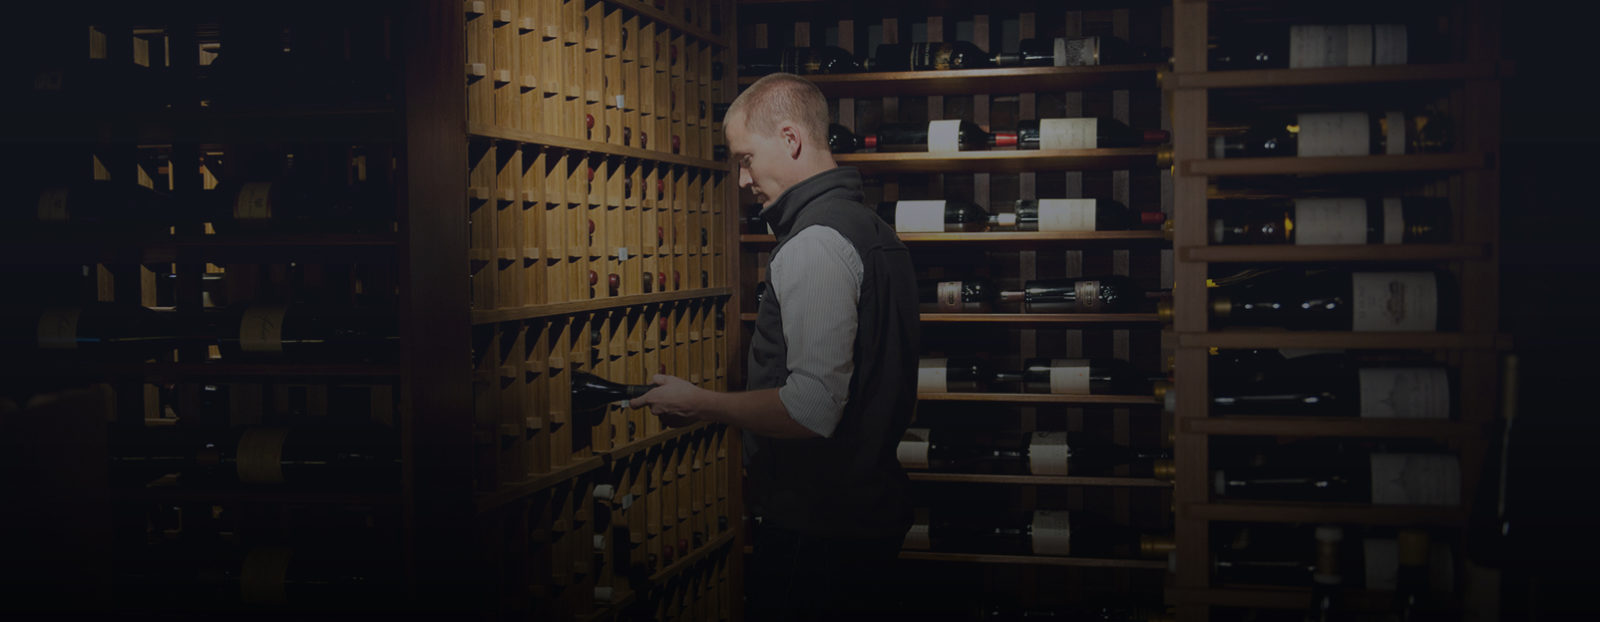 A Domaine employee puts away a bottle of wine as he offers wine cellar management to a client.